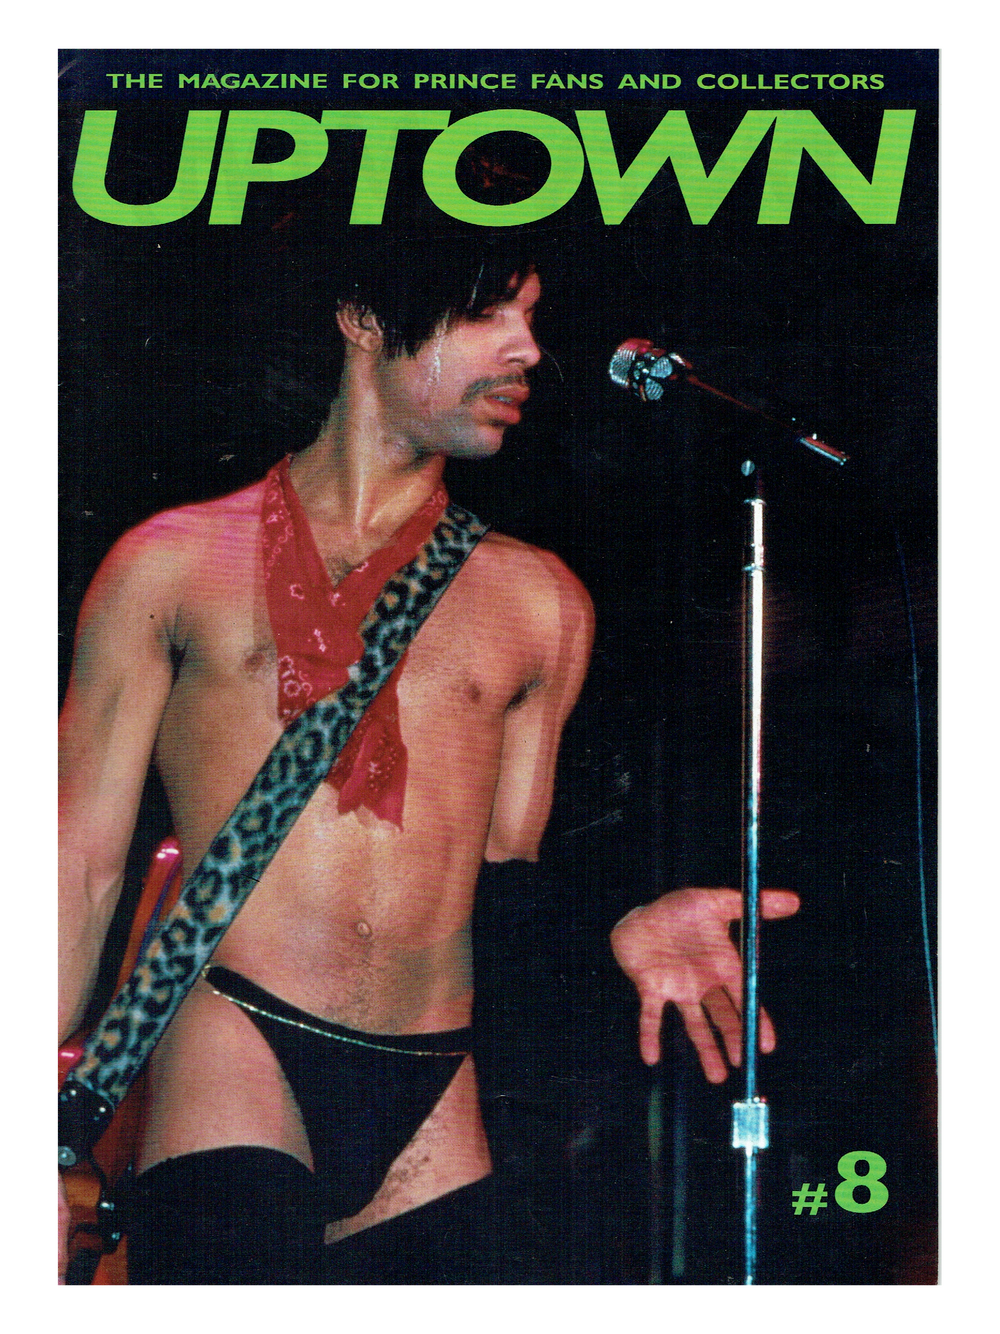 Uptown The Magazine For Prince Fans & Collectors Issue Number 8